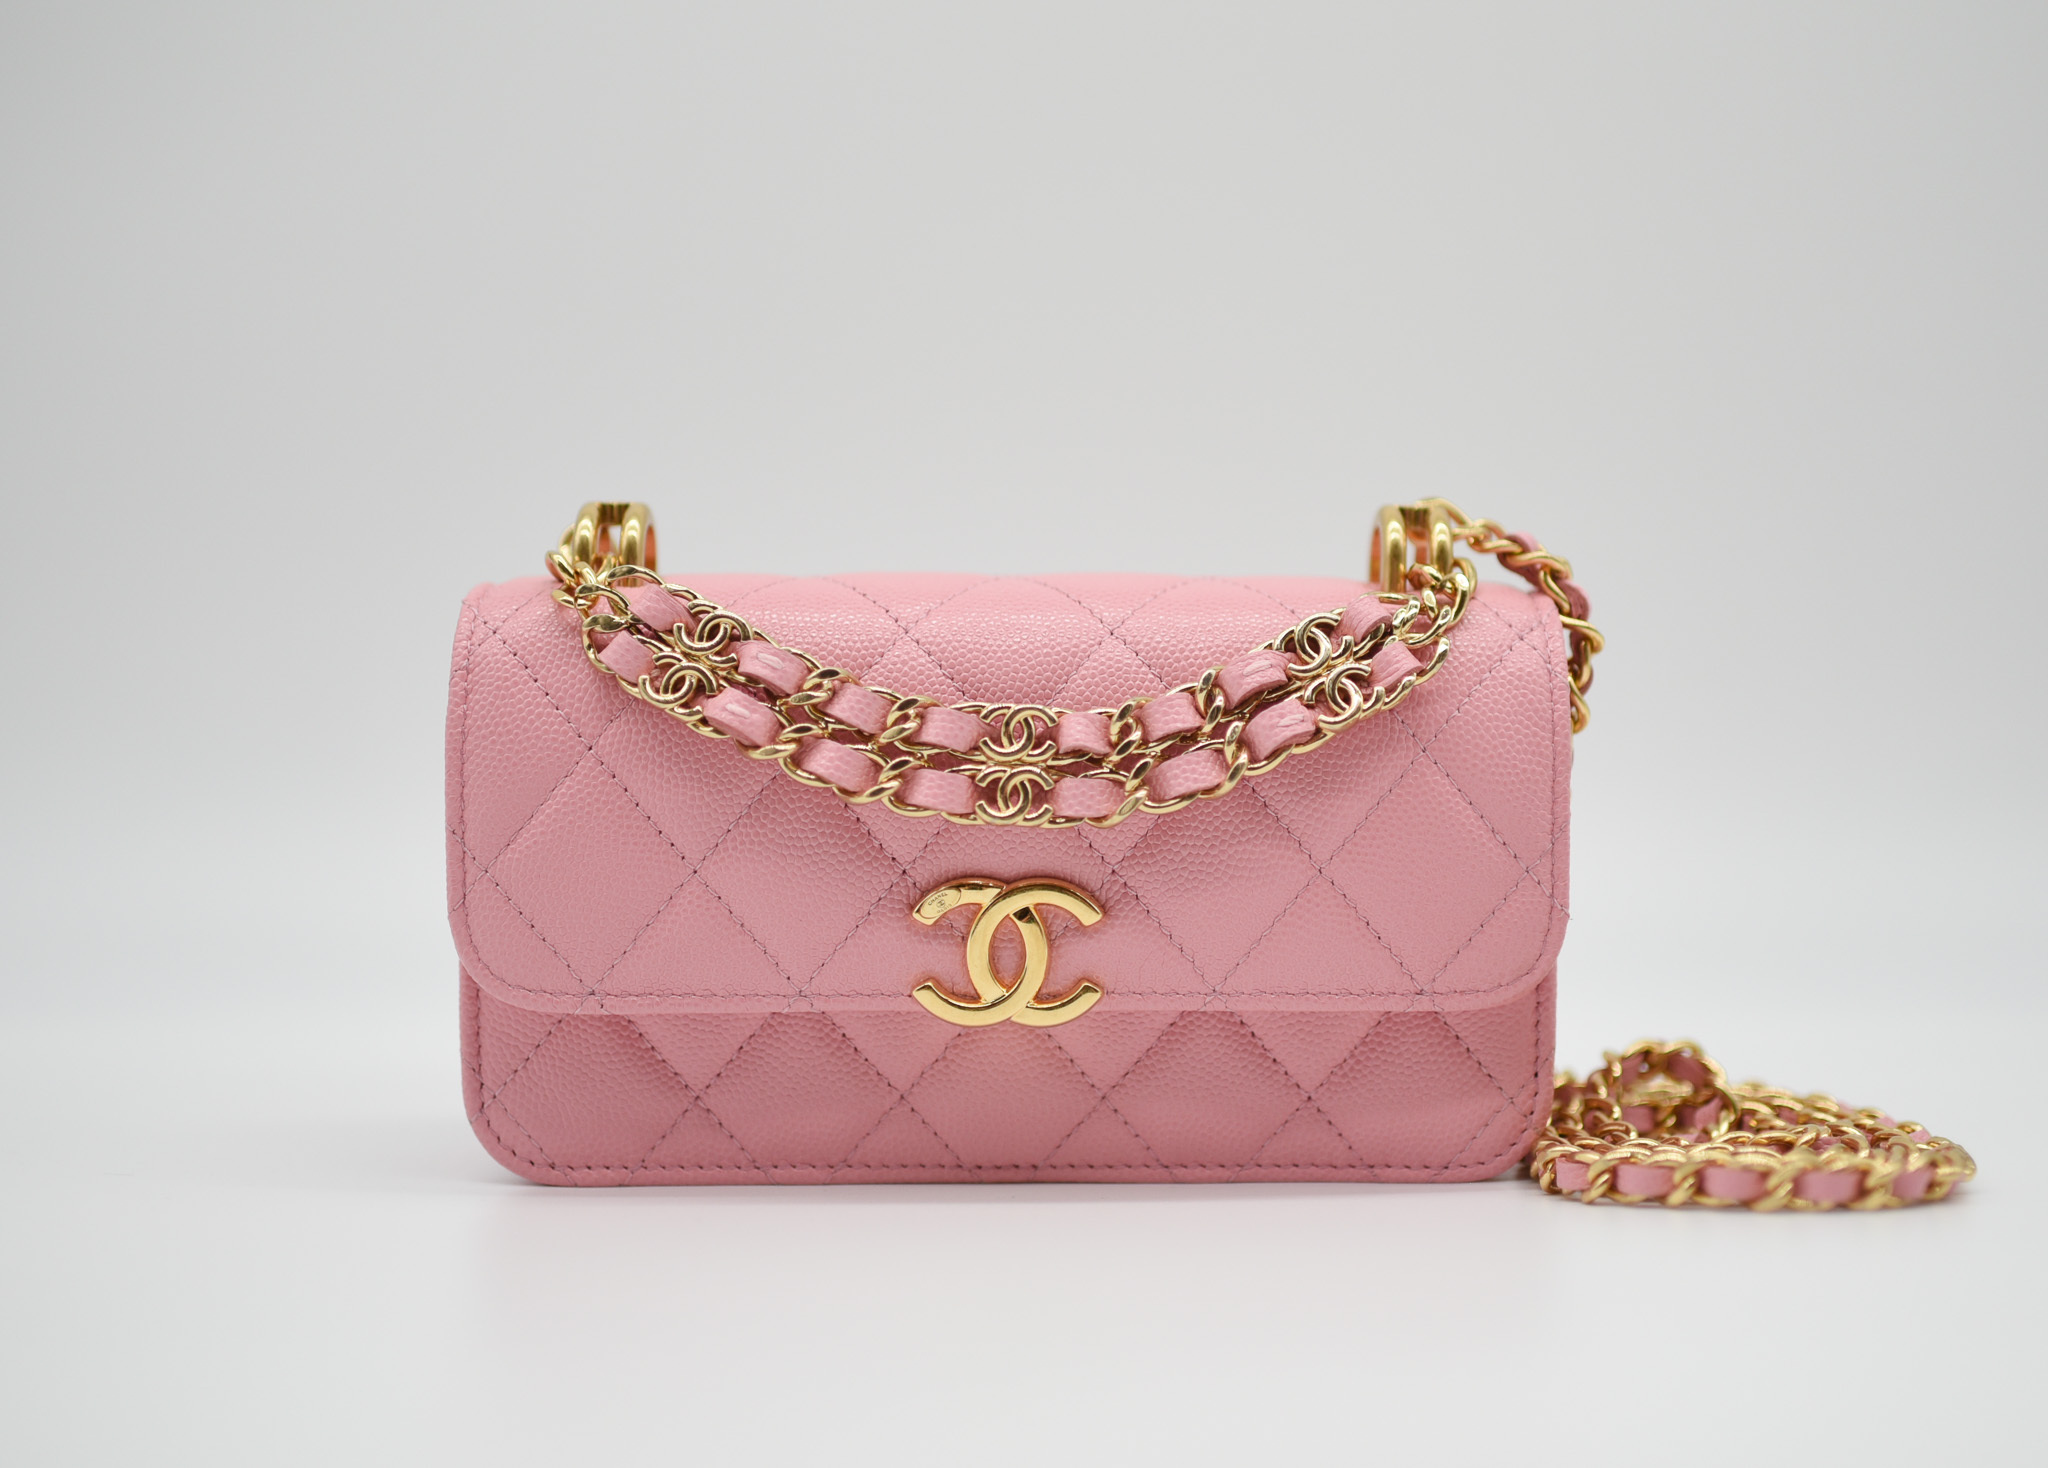 Chanel Small Hobo Bag, Pink Lambskin Leather, Gold Hardware, New in Box  MA001